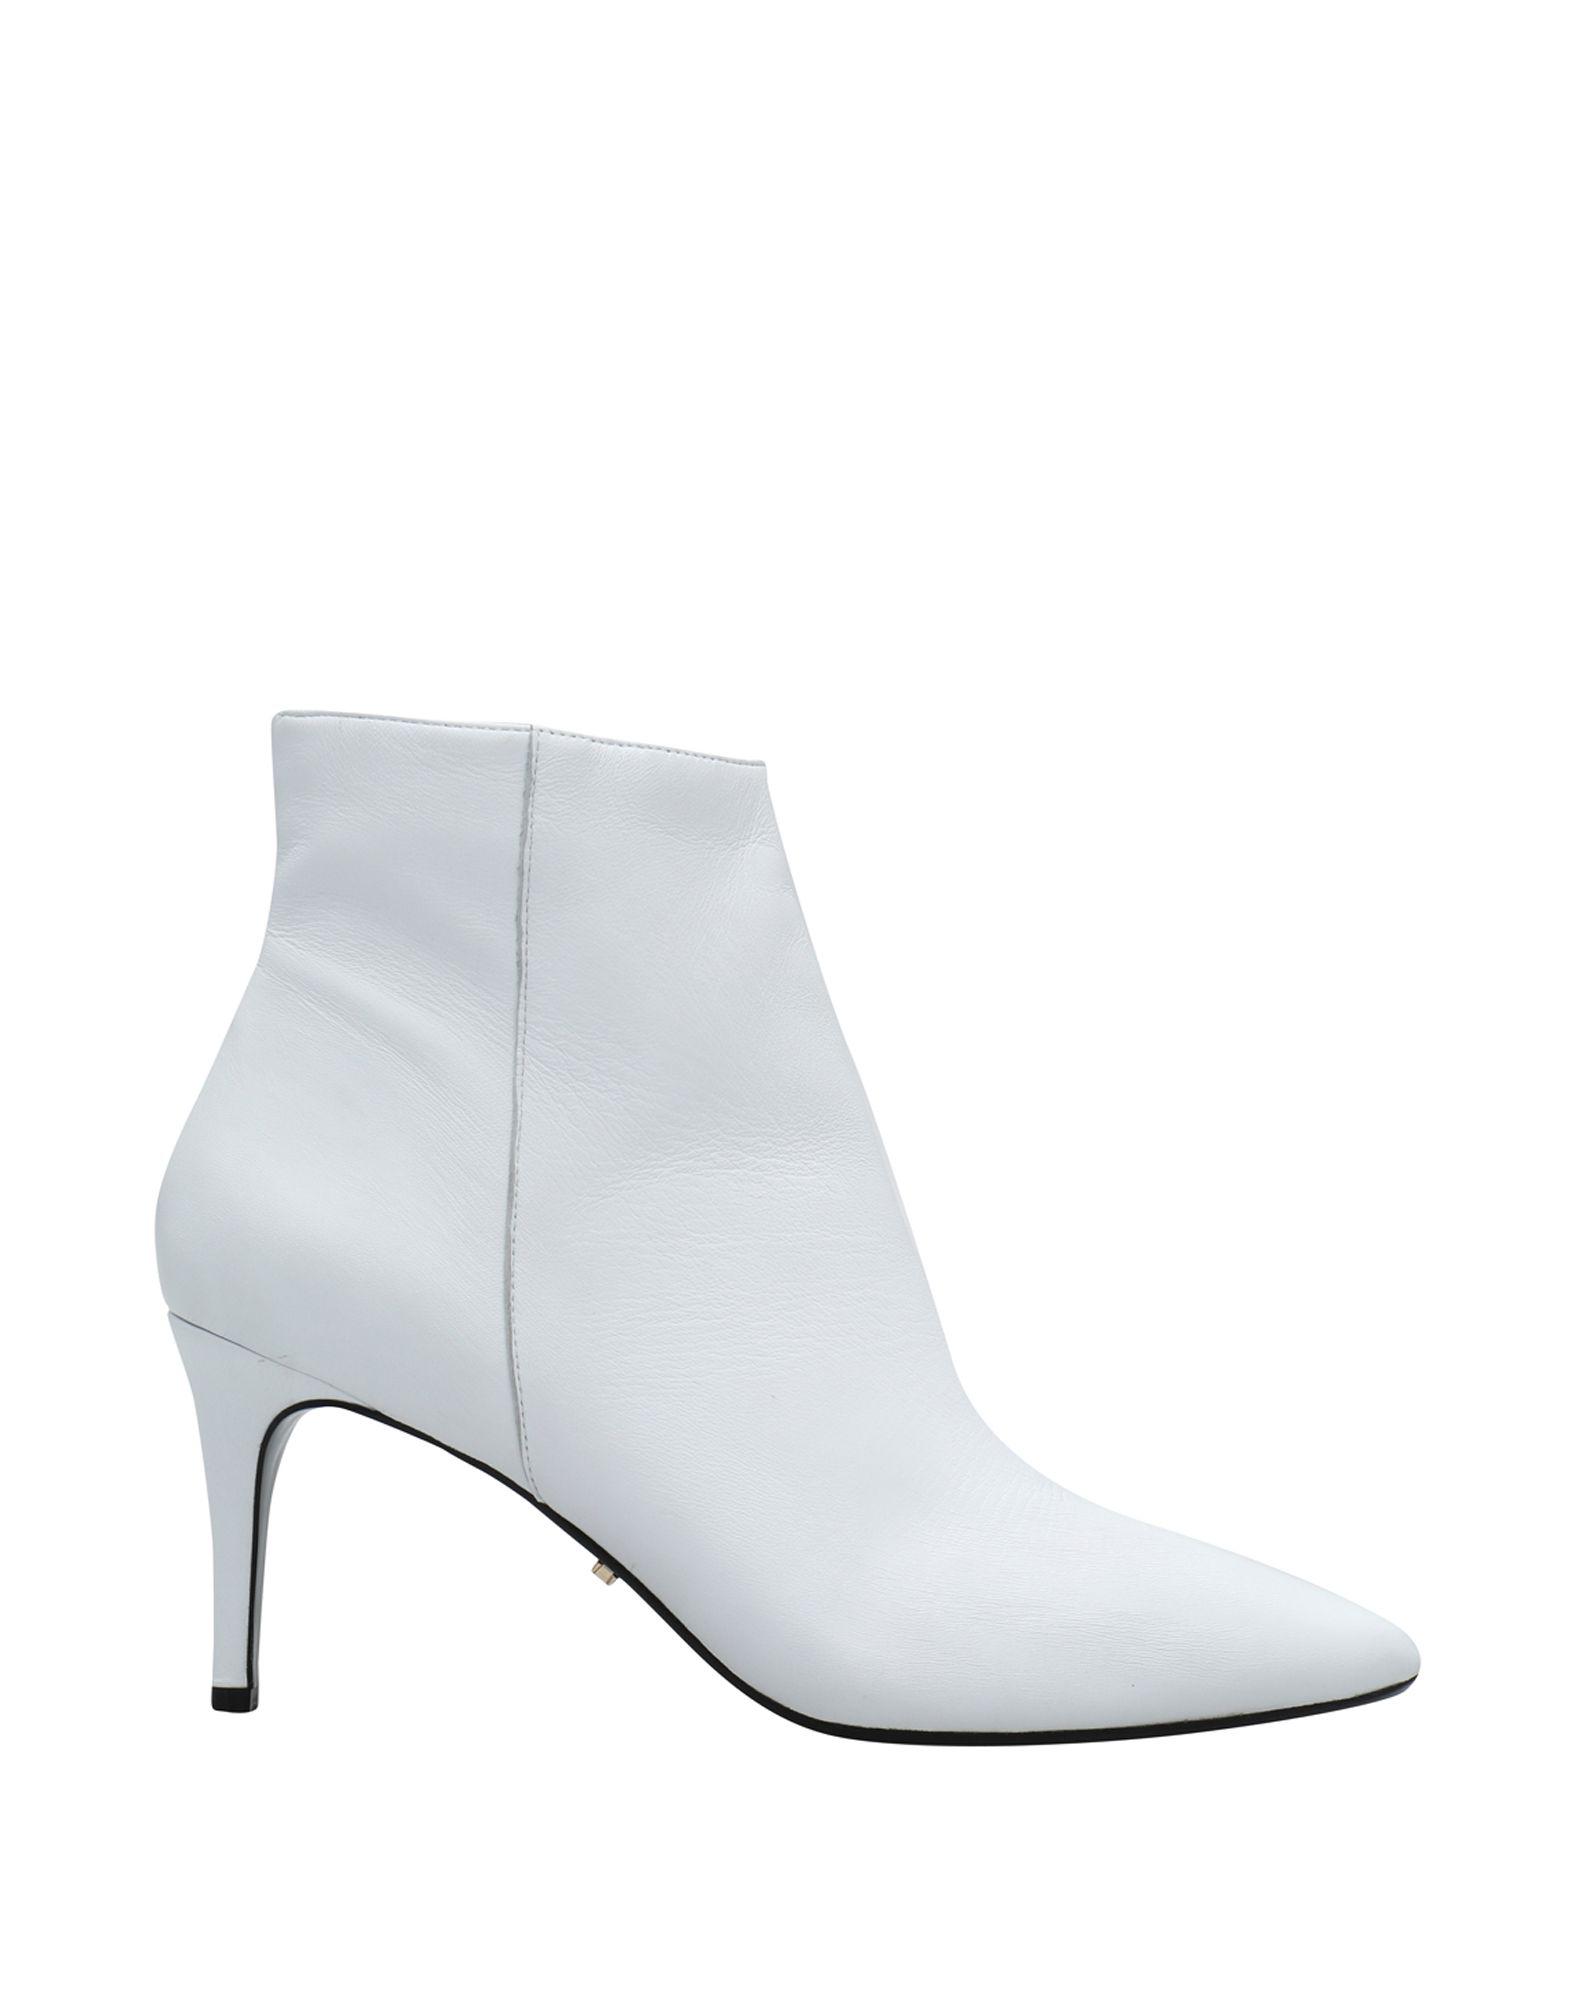 Dune Leather Ankle Boots in White - Lyst